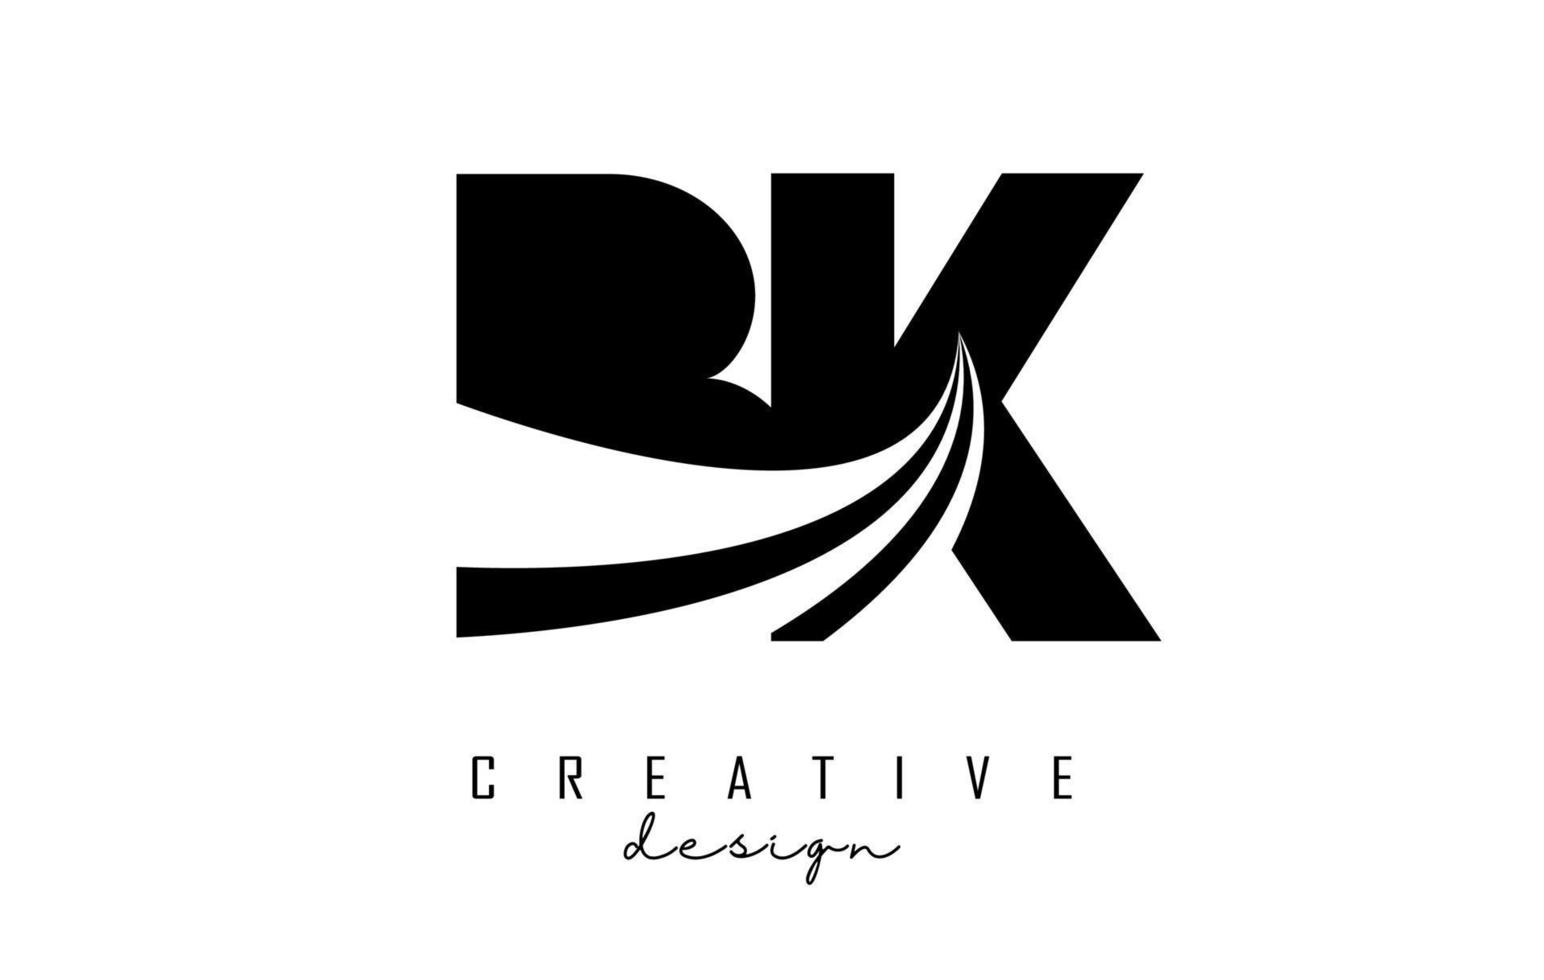 Creative black letters Bk b k logo with leading lines and road concept design. Letters with geometric design. vector